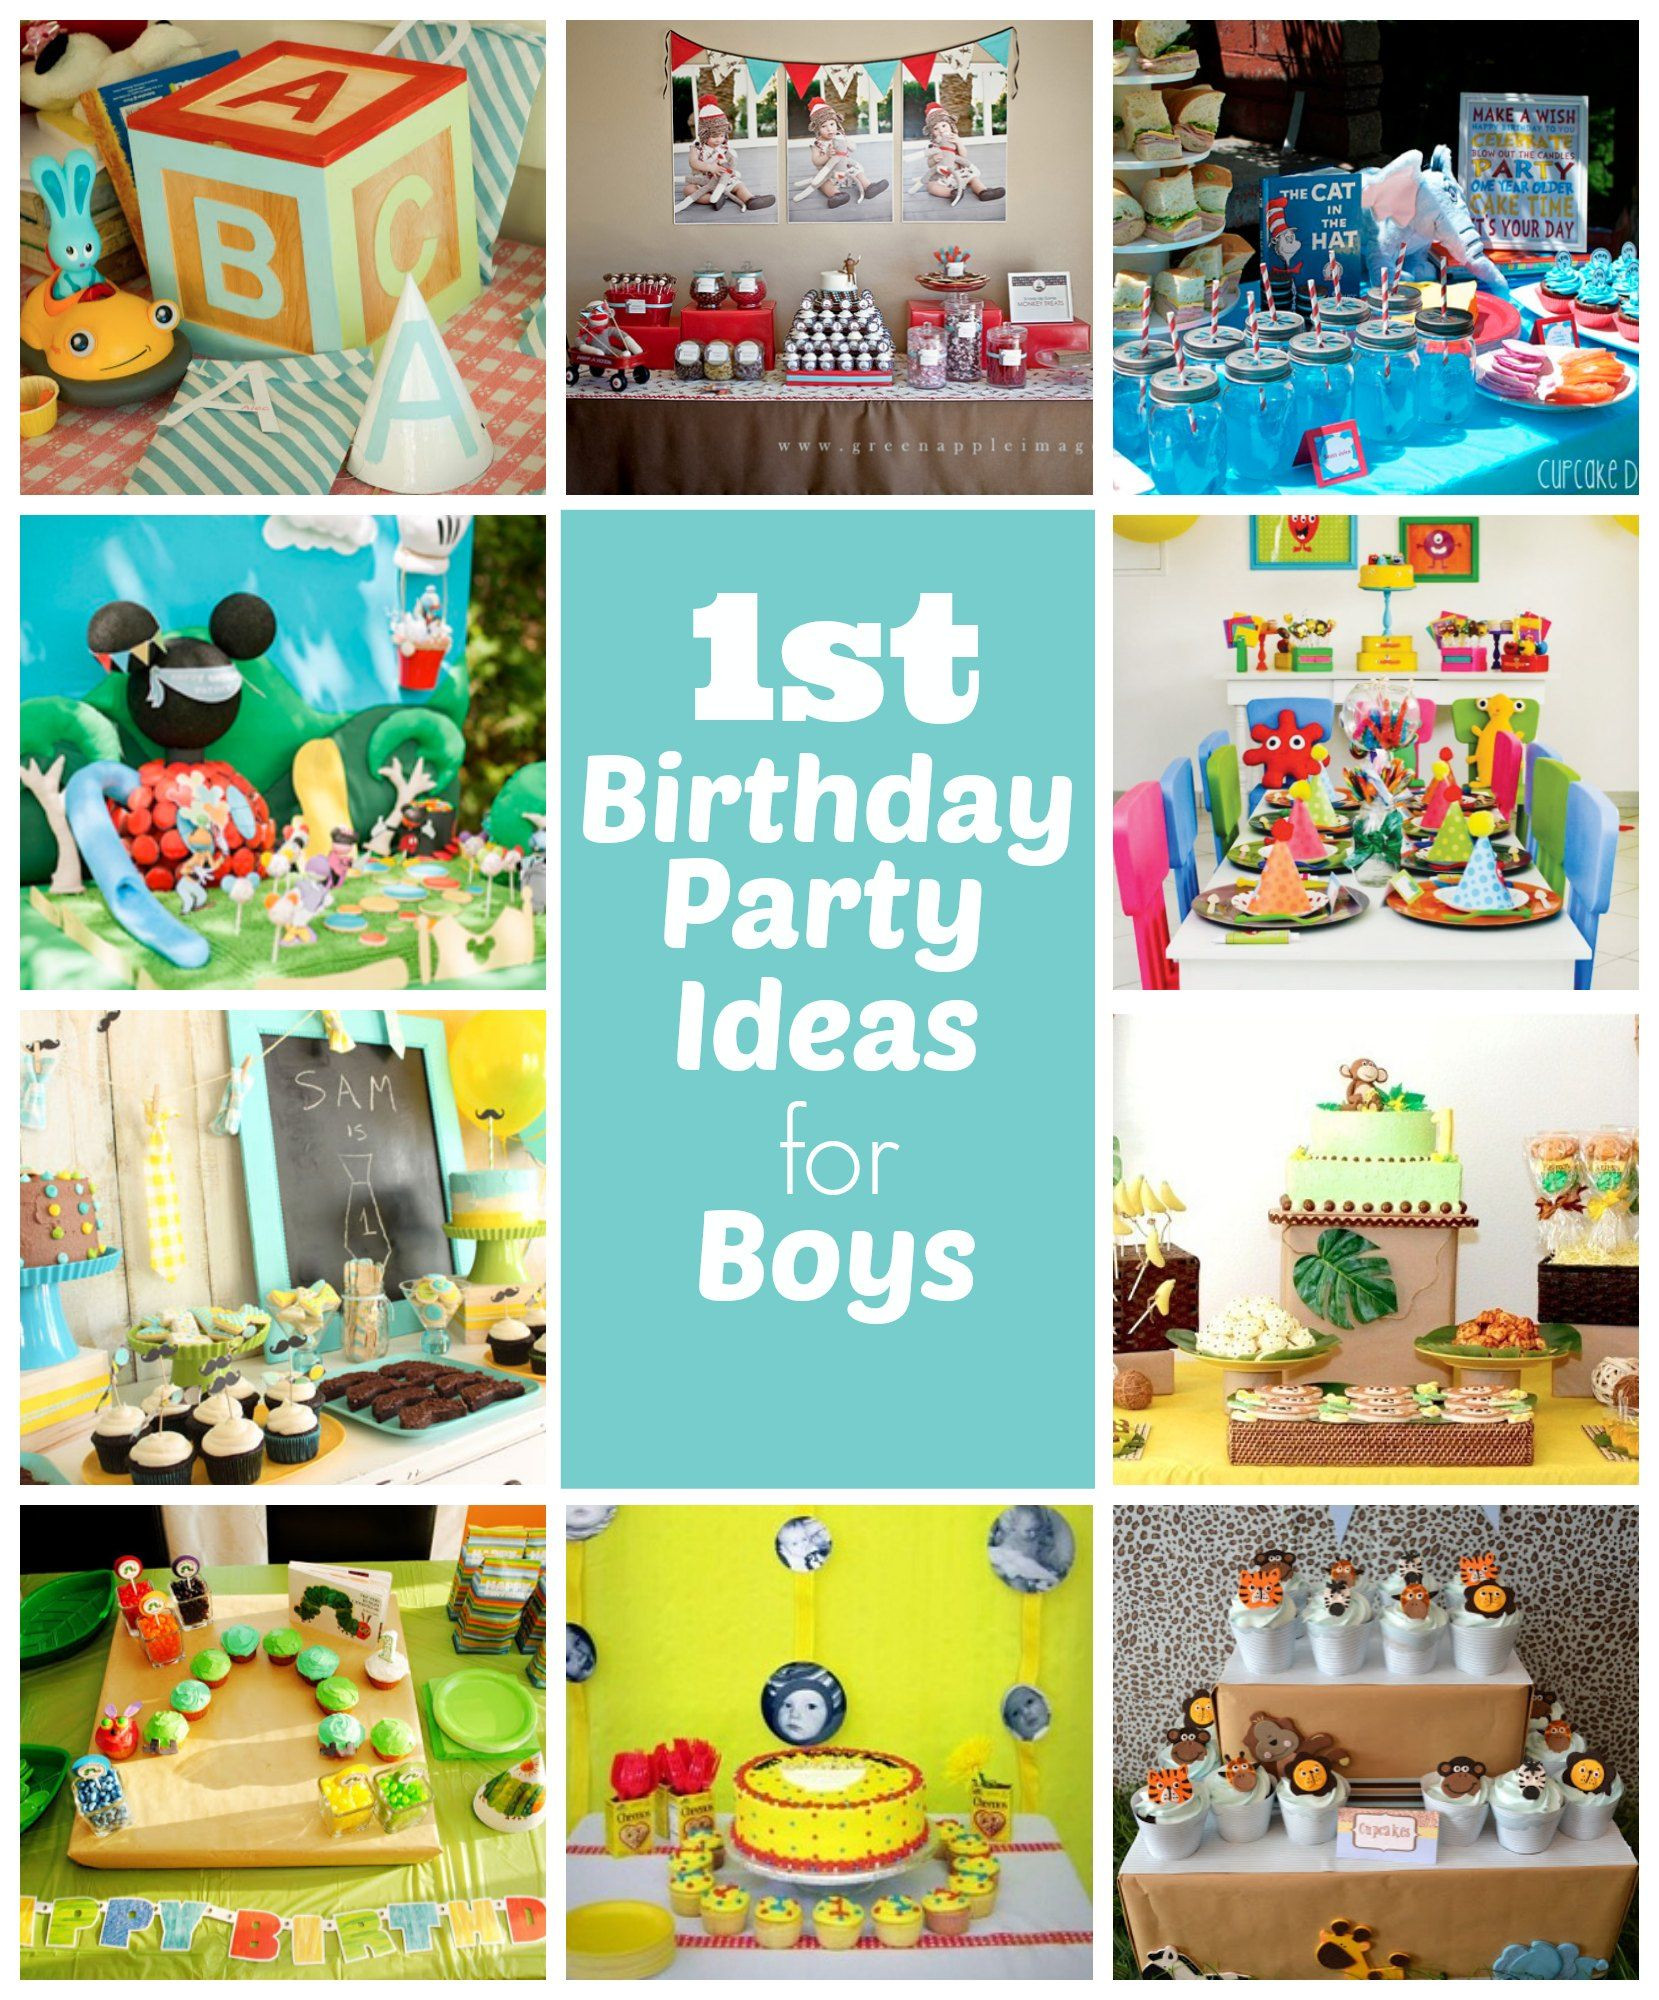 1St Birthday Party Themes For Baby Boy
 1st Birthday Party Ideas for Boys Great ideas including